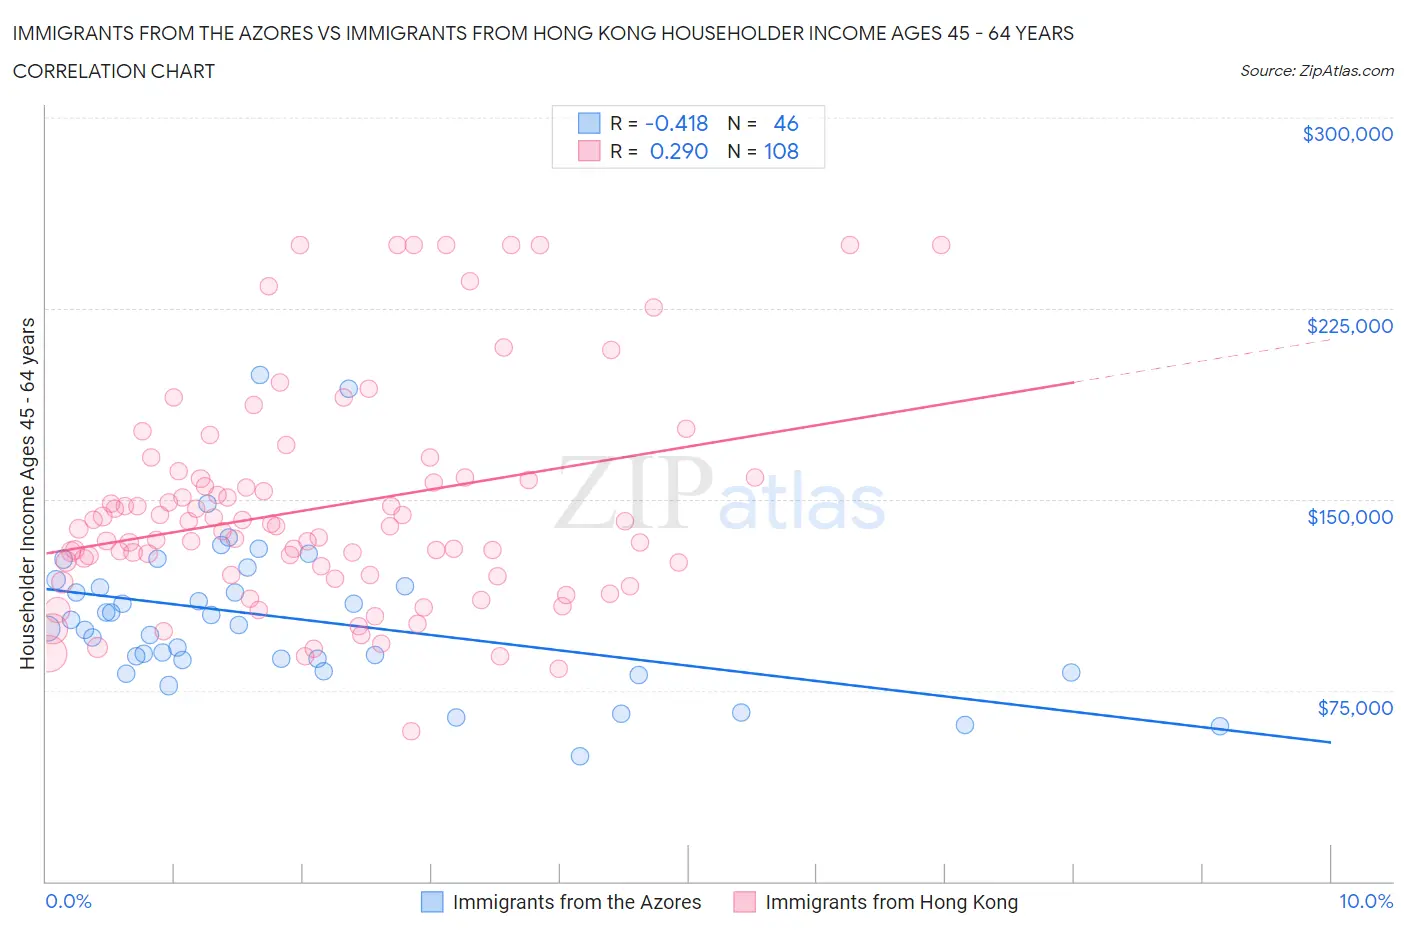 Immigrants from the Azores vs Immigrants from Hong Kong Householder Income Ages 45 - 64 years